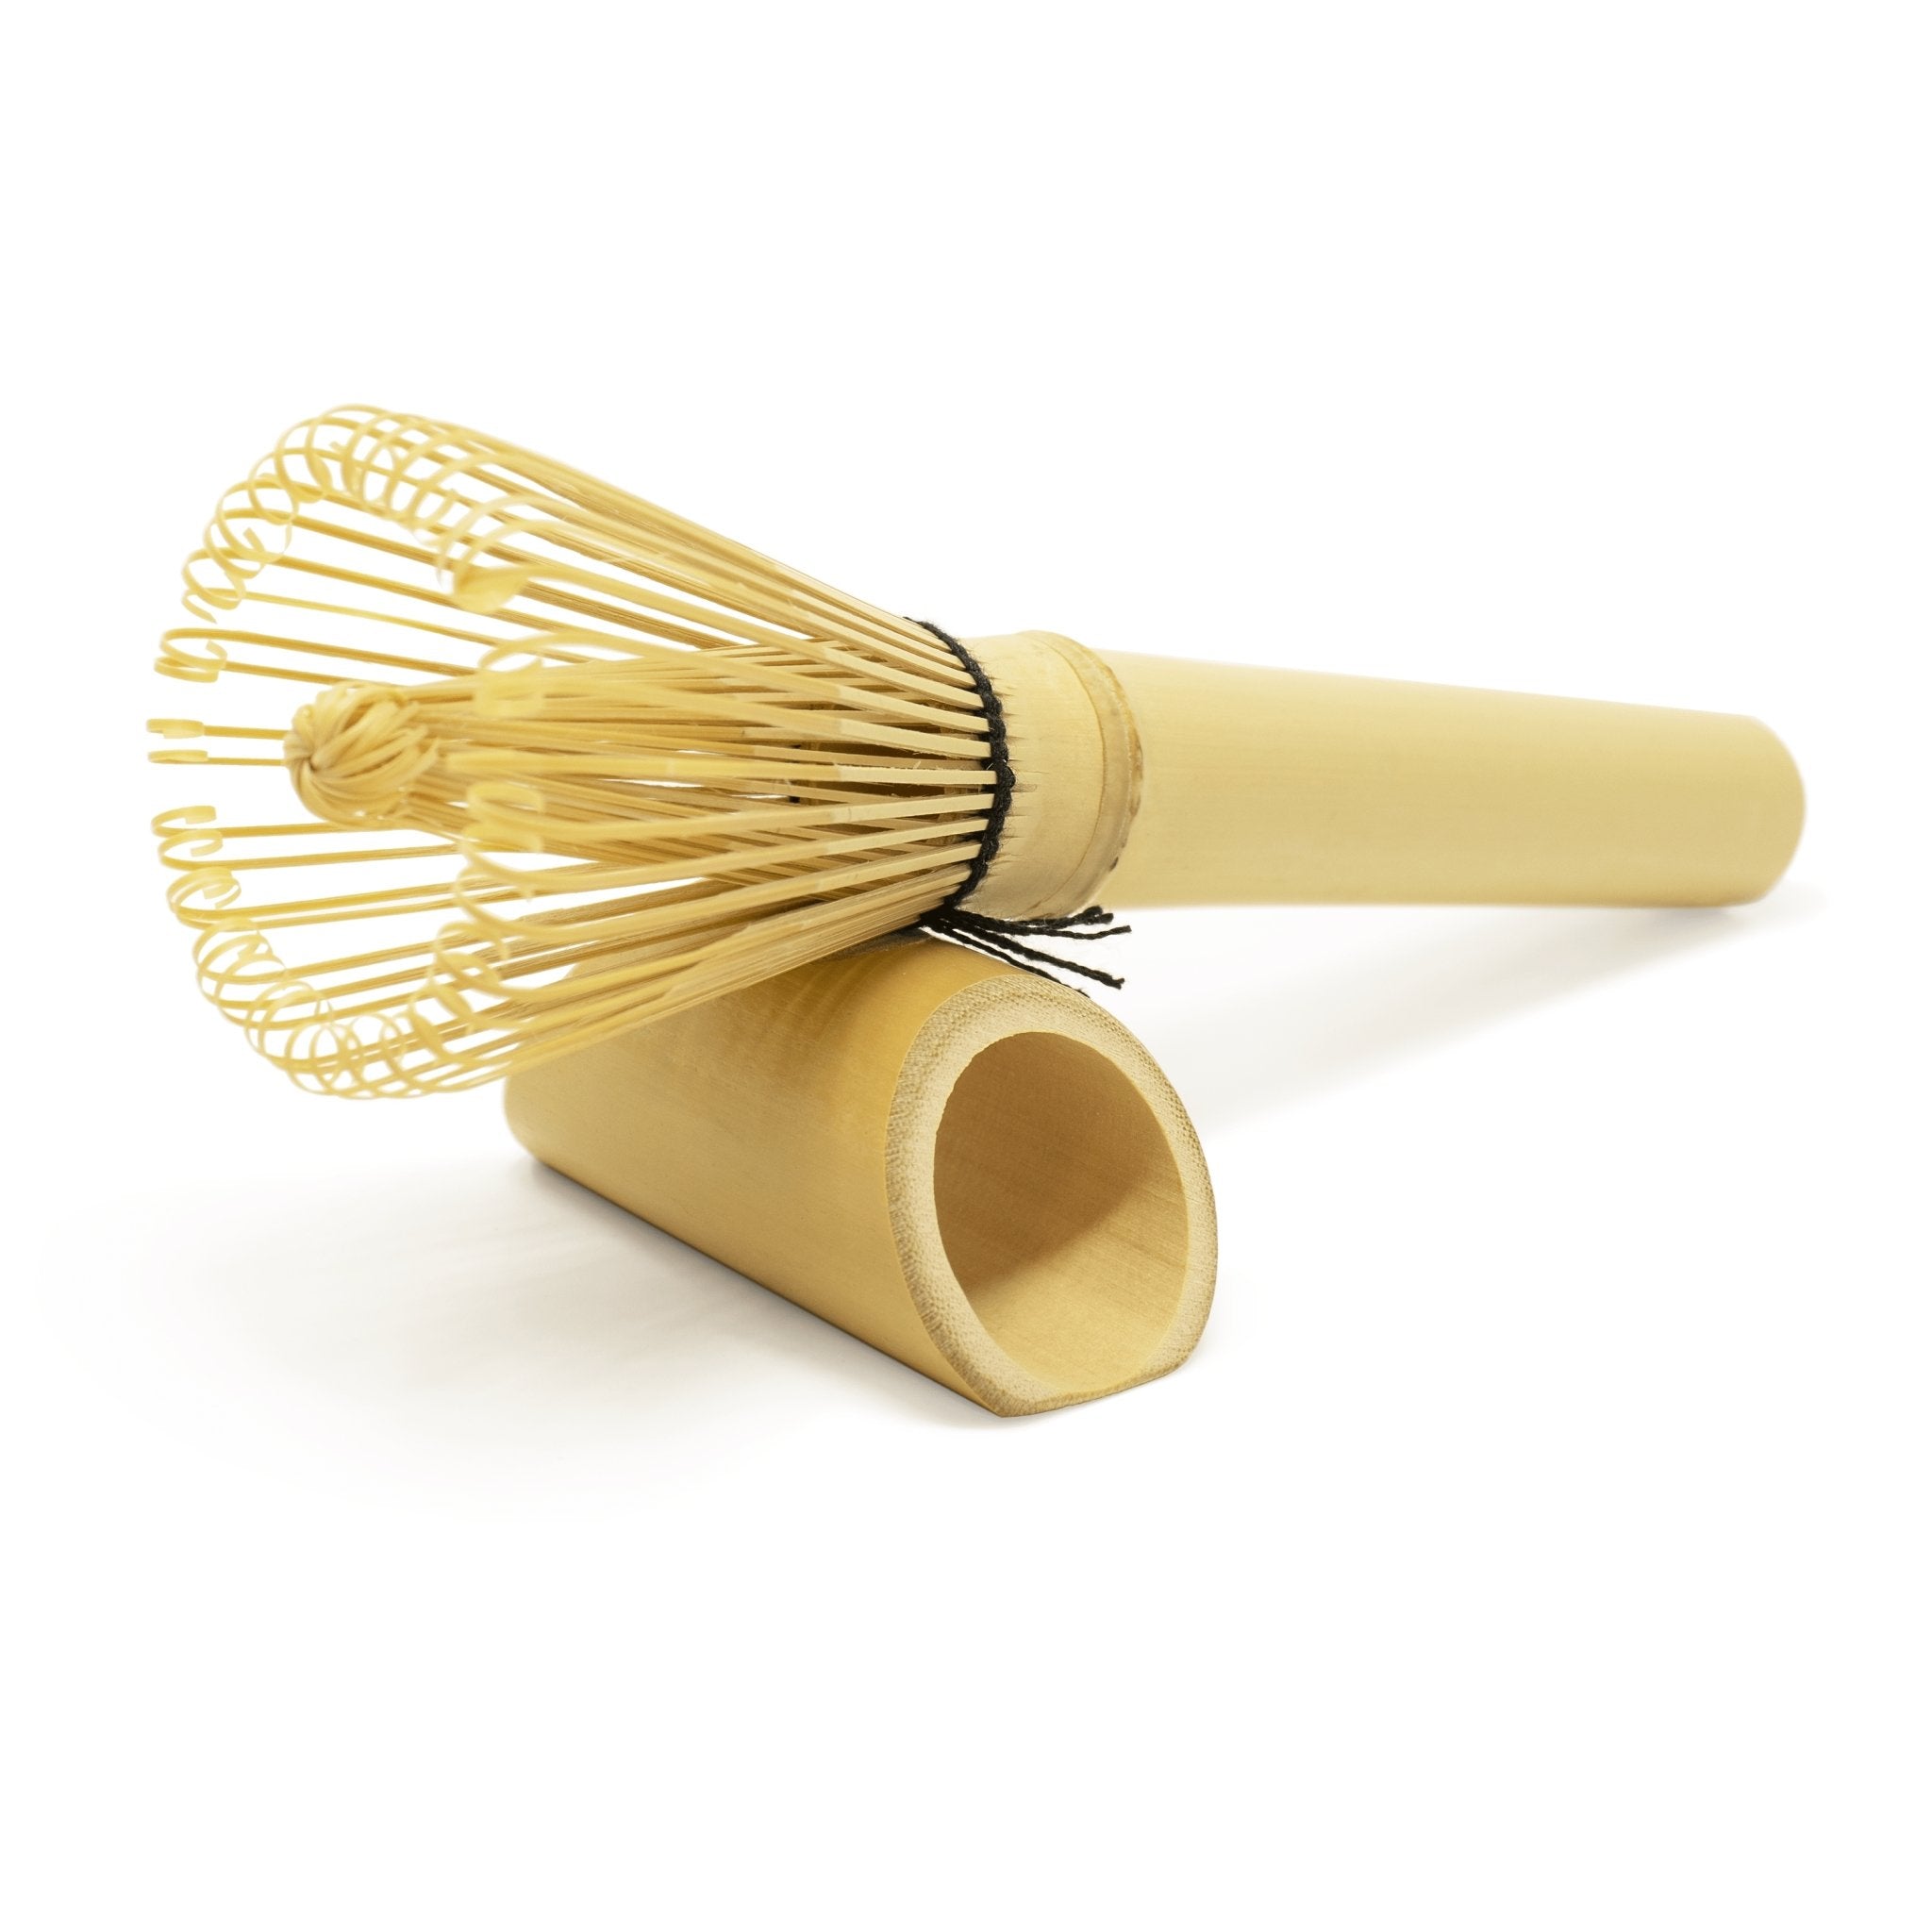 Matcha Whisk - White Bamboo for Frothy Matcha